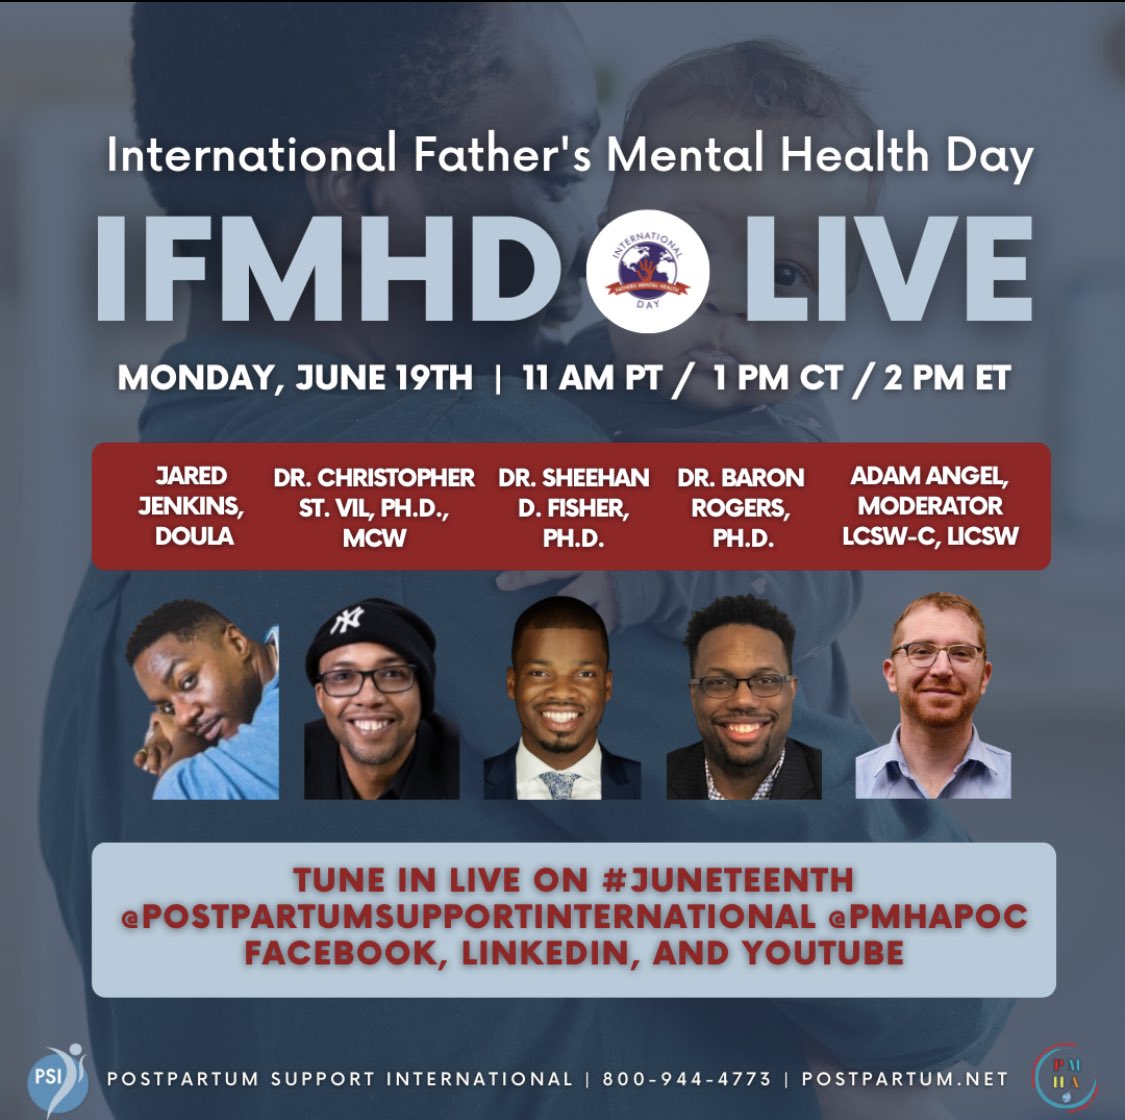 Free live event for #FathersDay2023 and #Juneteenth2023 Black Fatherhood Past, Present, Future youtube.com/live/TBPT_DwH1… Monday June 19th 7pm UK time. @MFFonline_ @fivexmore @dopeblackdads @DADSINMIND